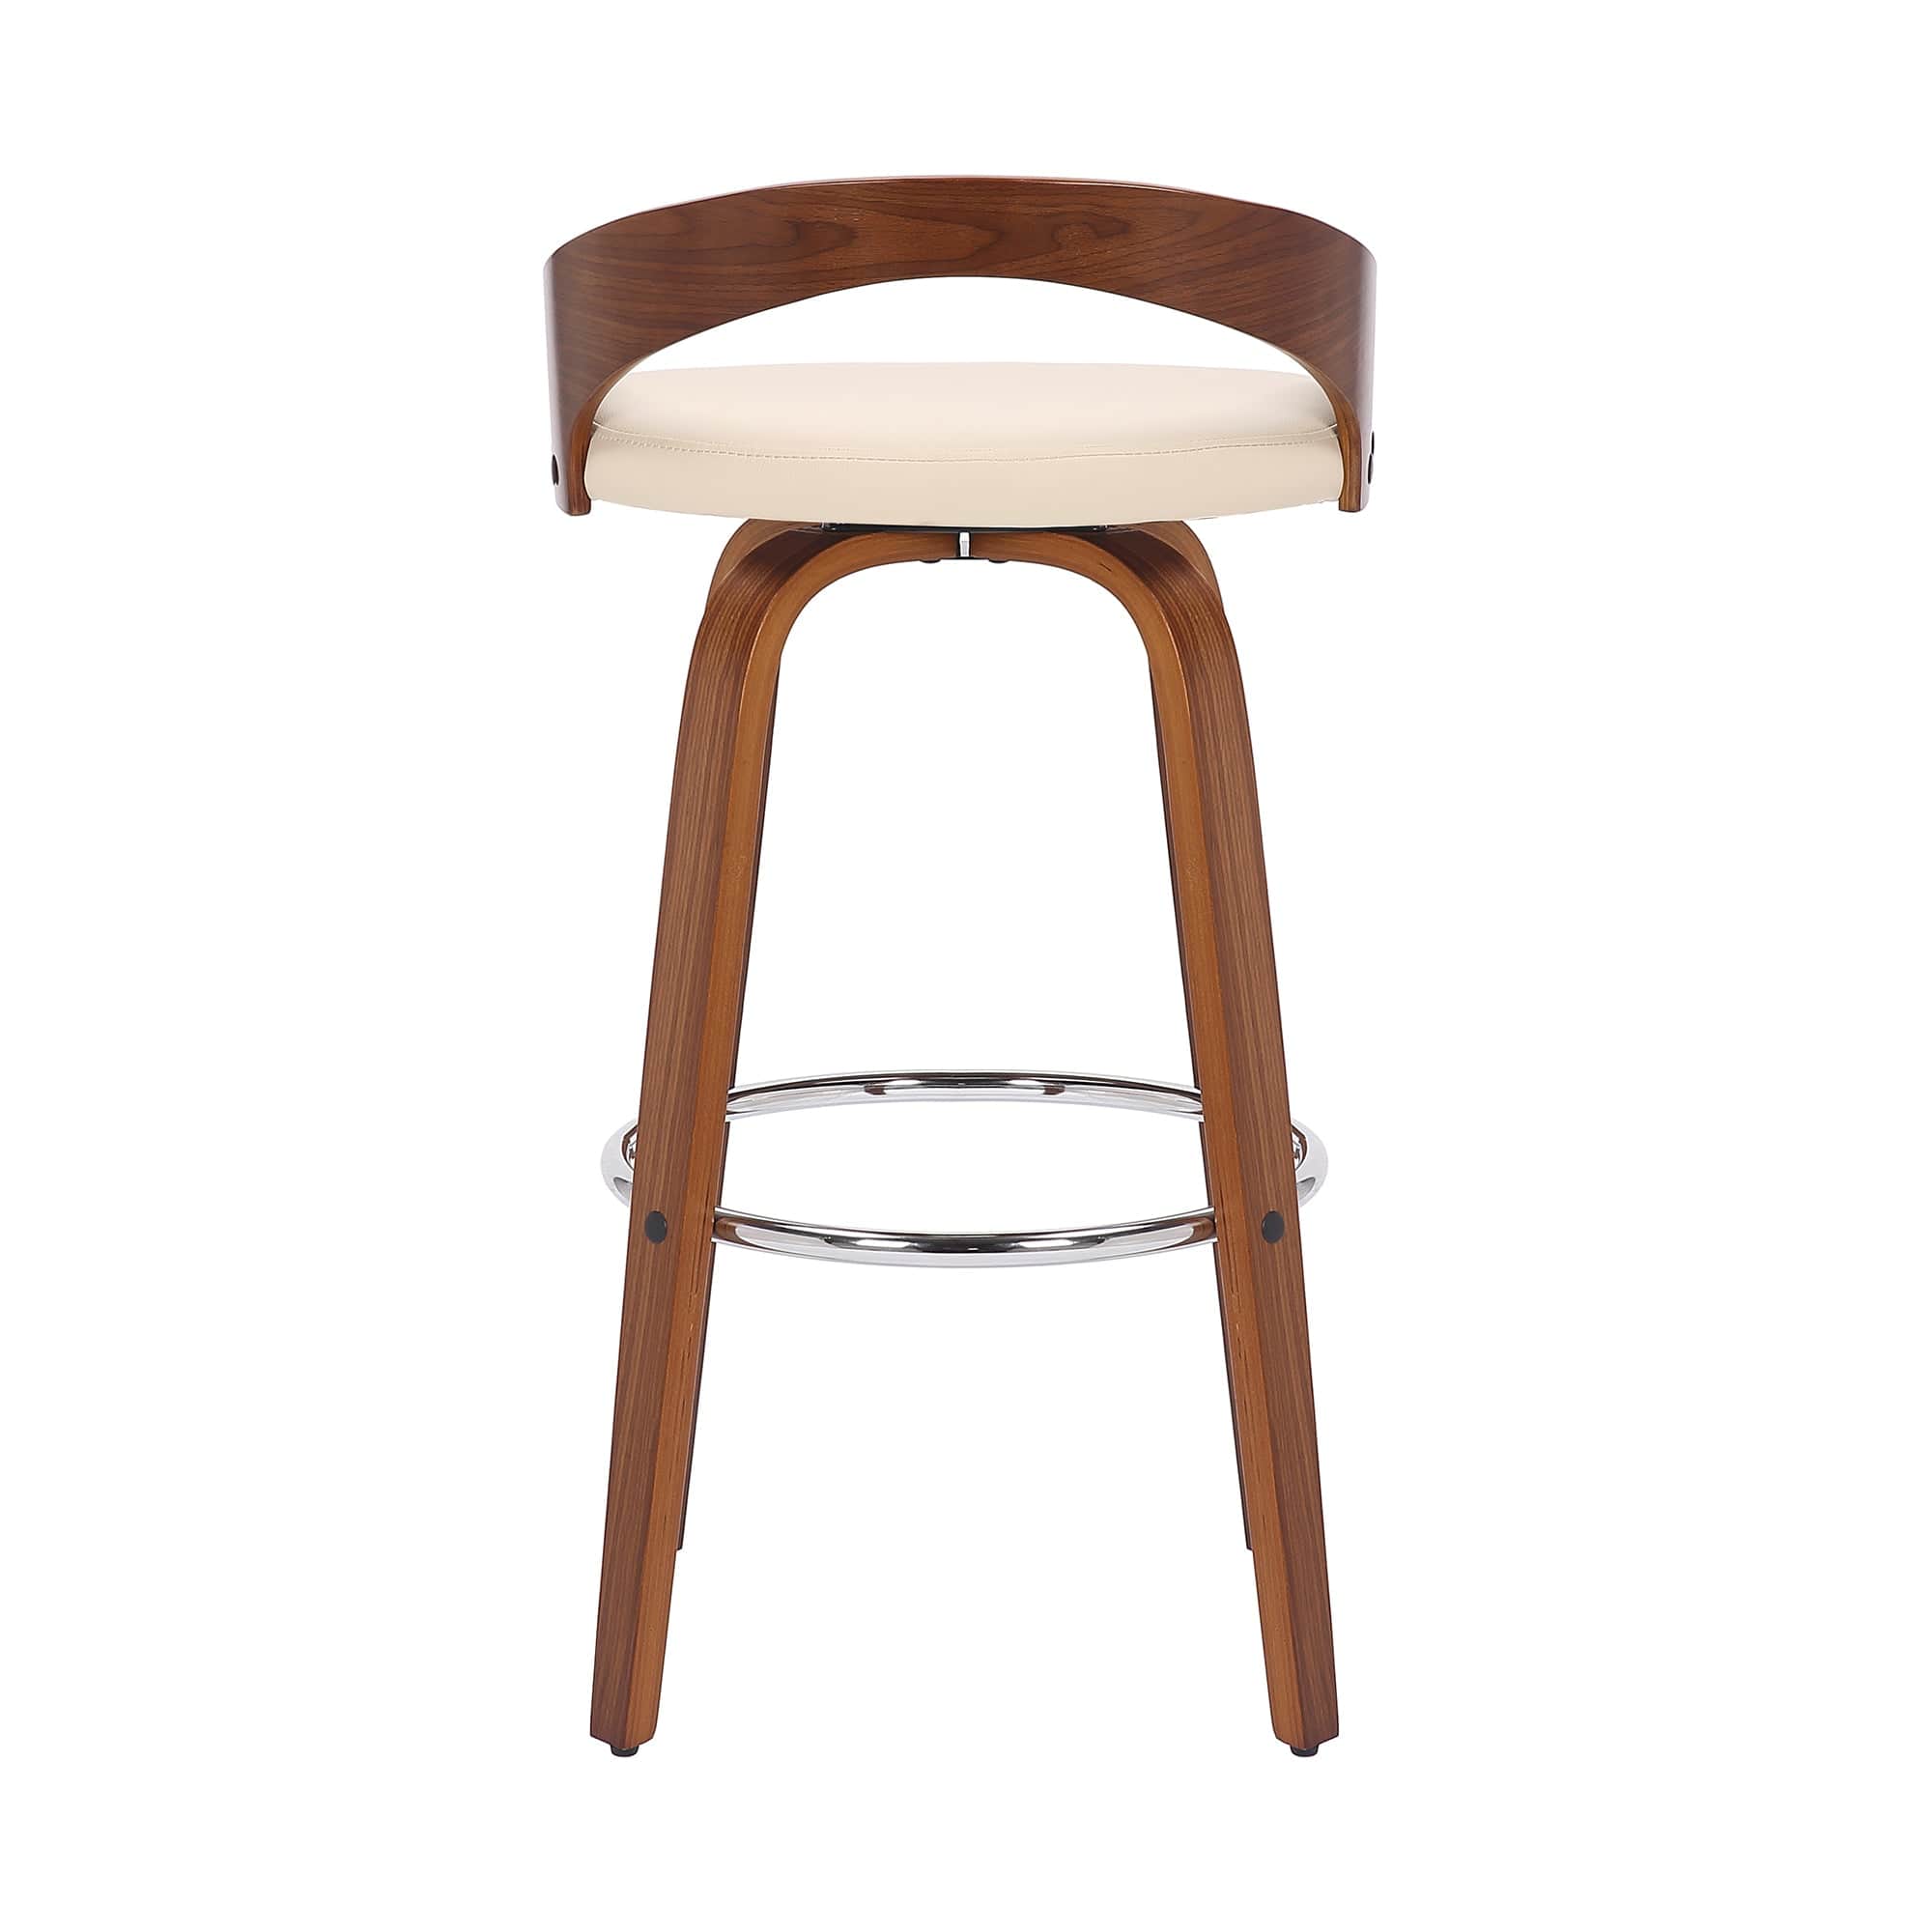 Armen Living Barstool Armen Living - Sonia 26" Counter Height Swivel Cream Faux Leather and Walnut Wood Bar Stool | LCSOBACRWA26